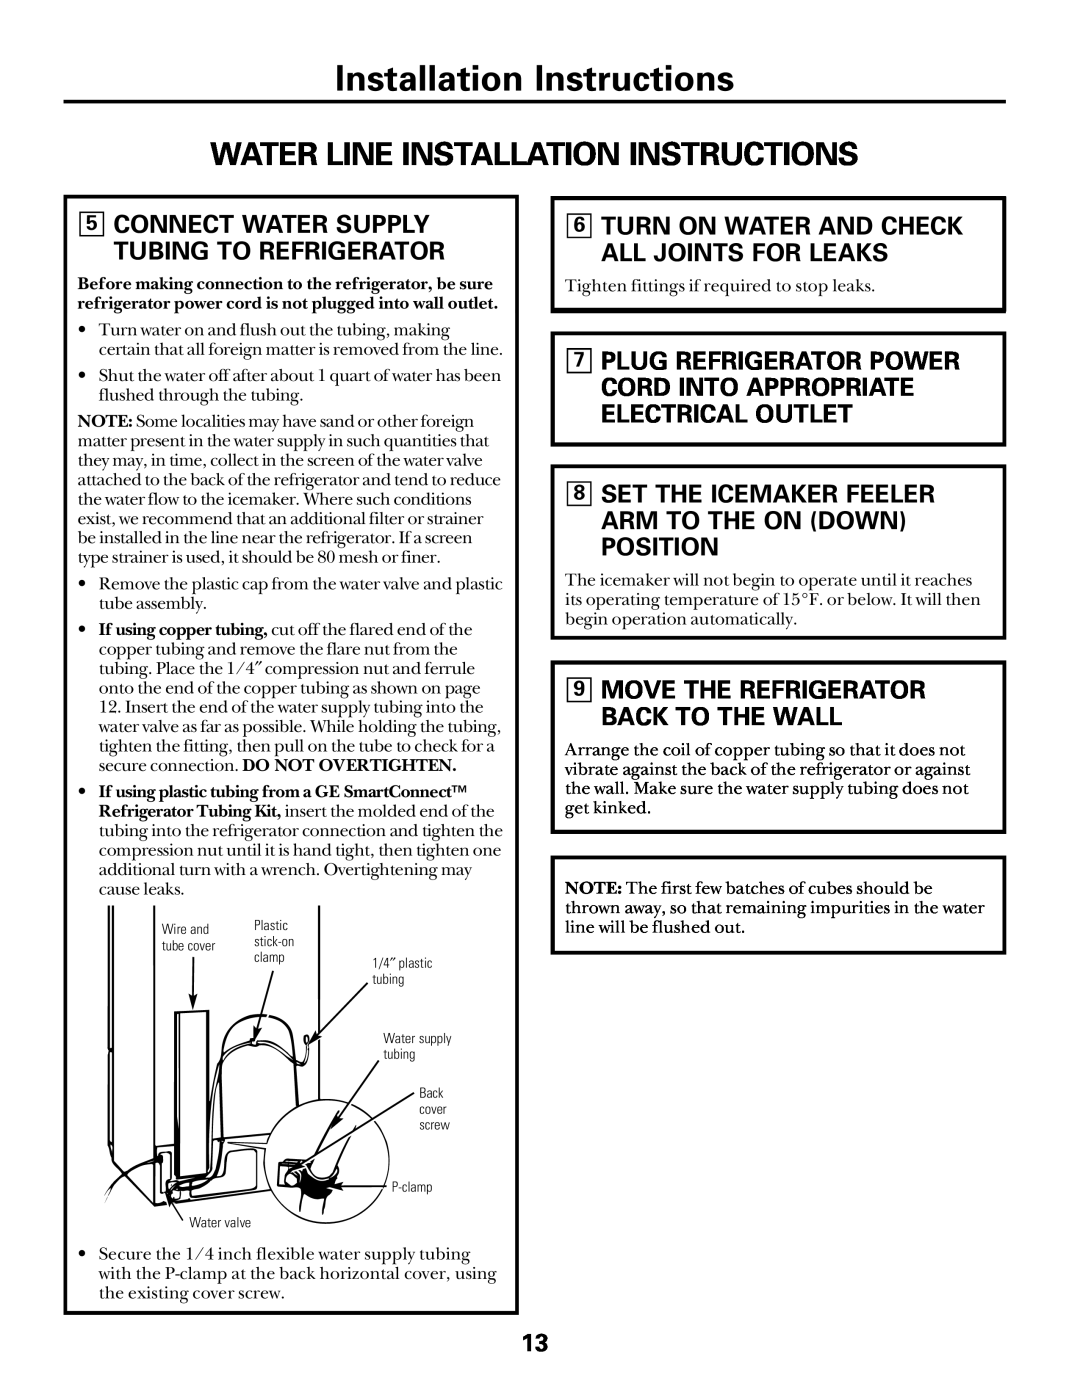 GE UK-KIT-3S owner manual 6TURN ON WATER AND CHECK ALL JOINTS FOR LEAKS, Installation Instructions 